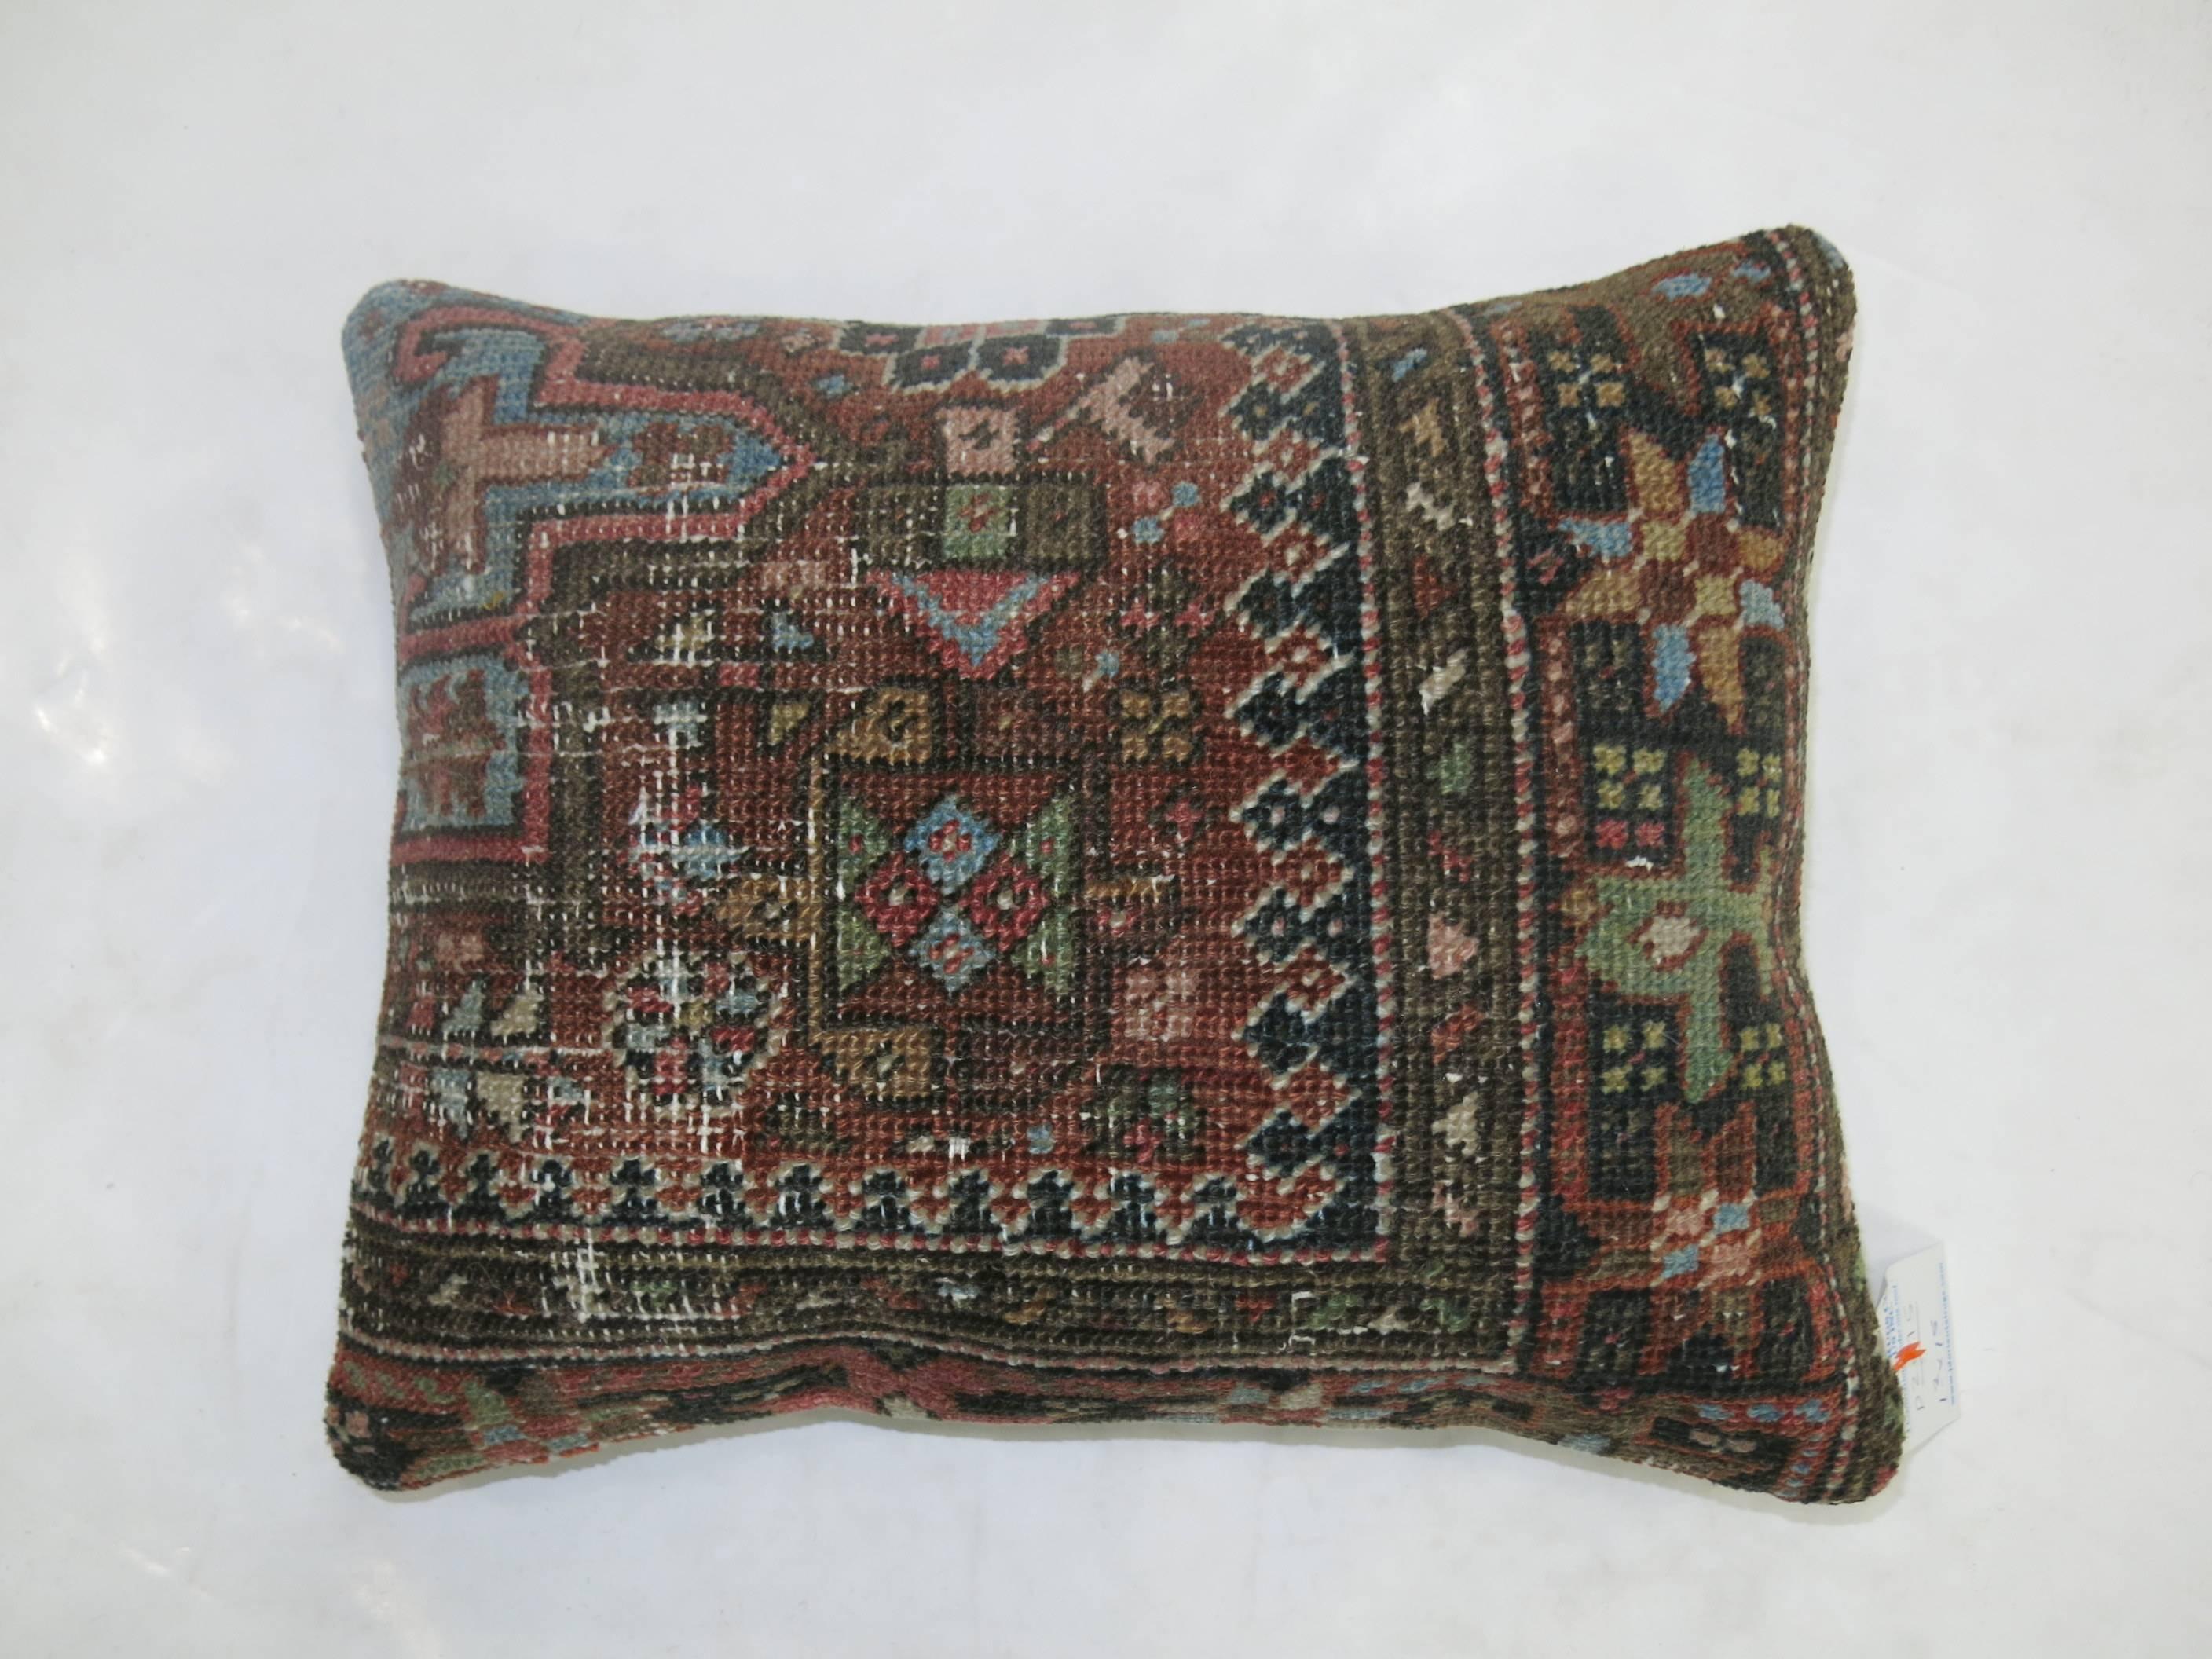 Complimentary set of antique Persian Heriz pillows. Measure: 14'' x 17'' and 17'' x 18''.